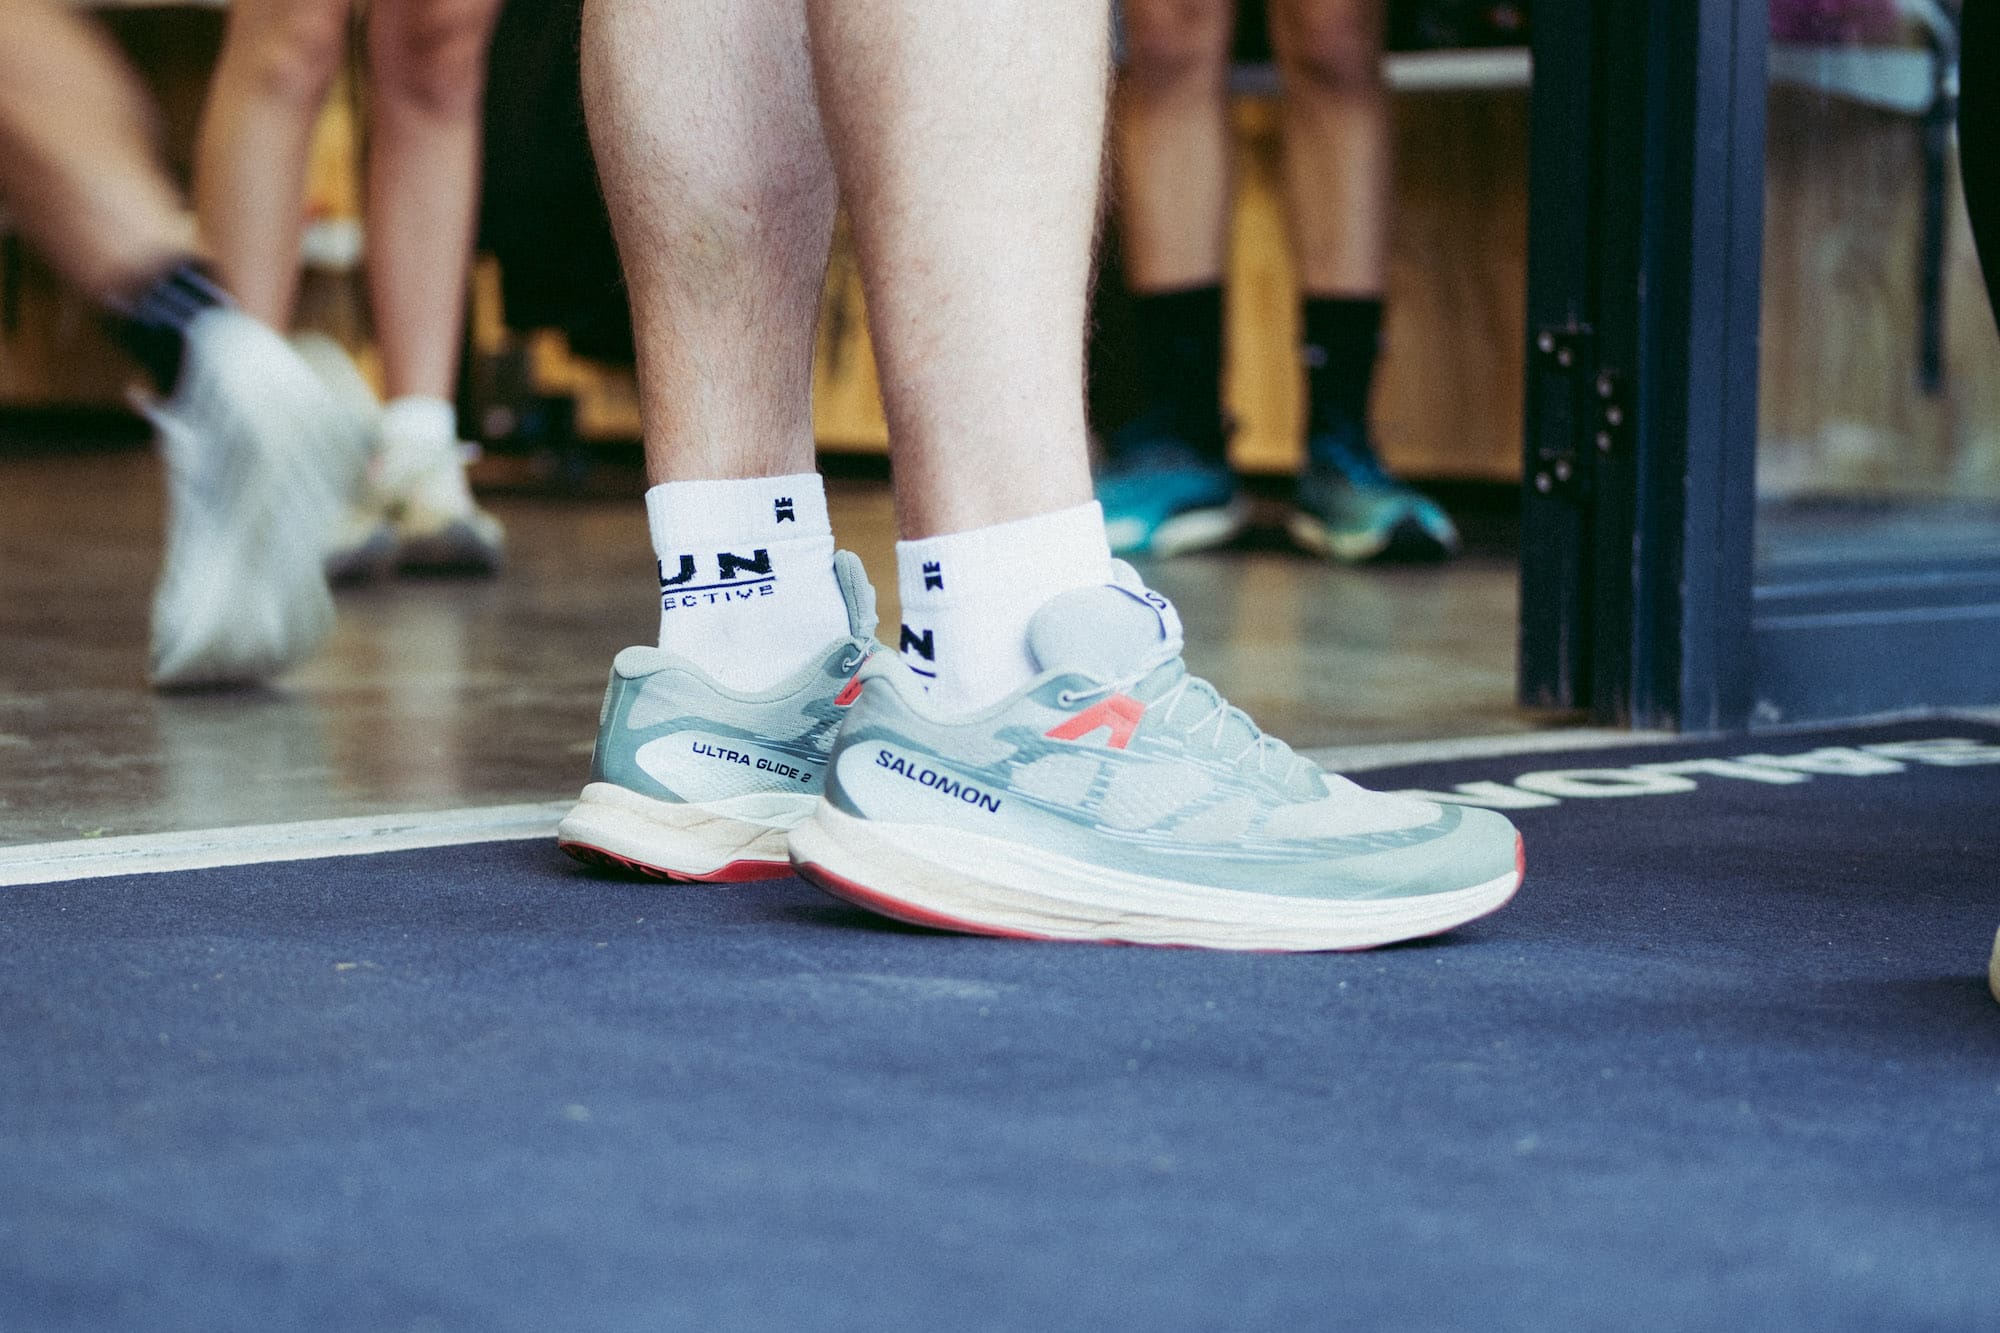 A photograph of the run collective custom sock in a pair of Salomon running shoes.